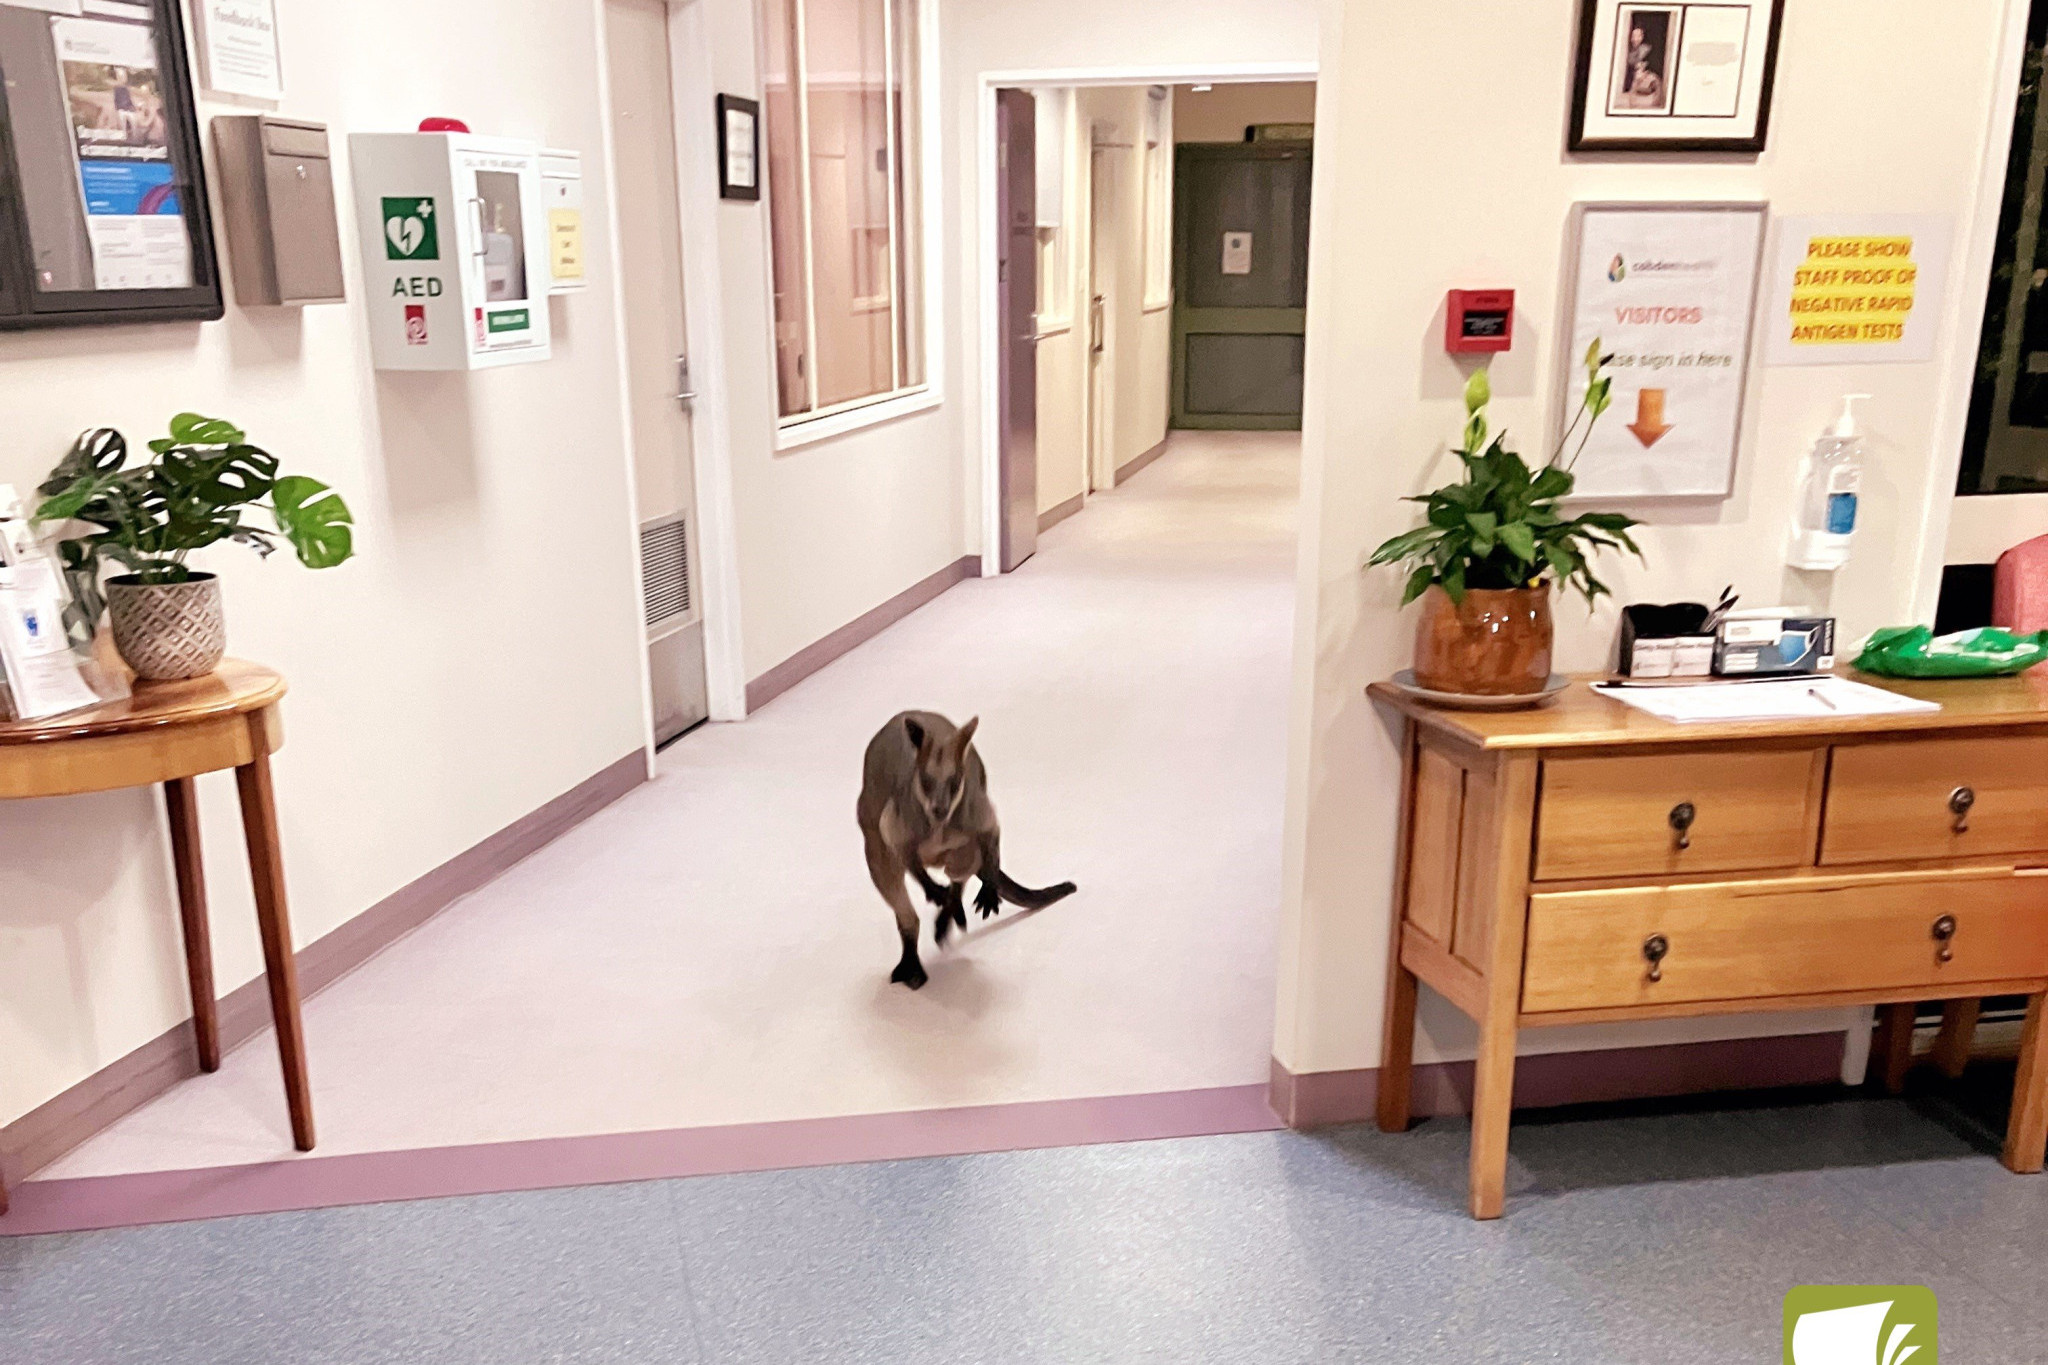 Hopping on in: Cobdenhealth had an unusual visitor last week, with a wallaby making its was into the front foyer.